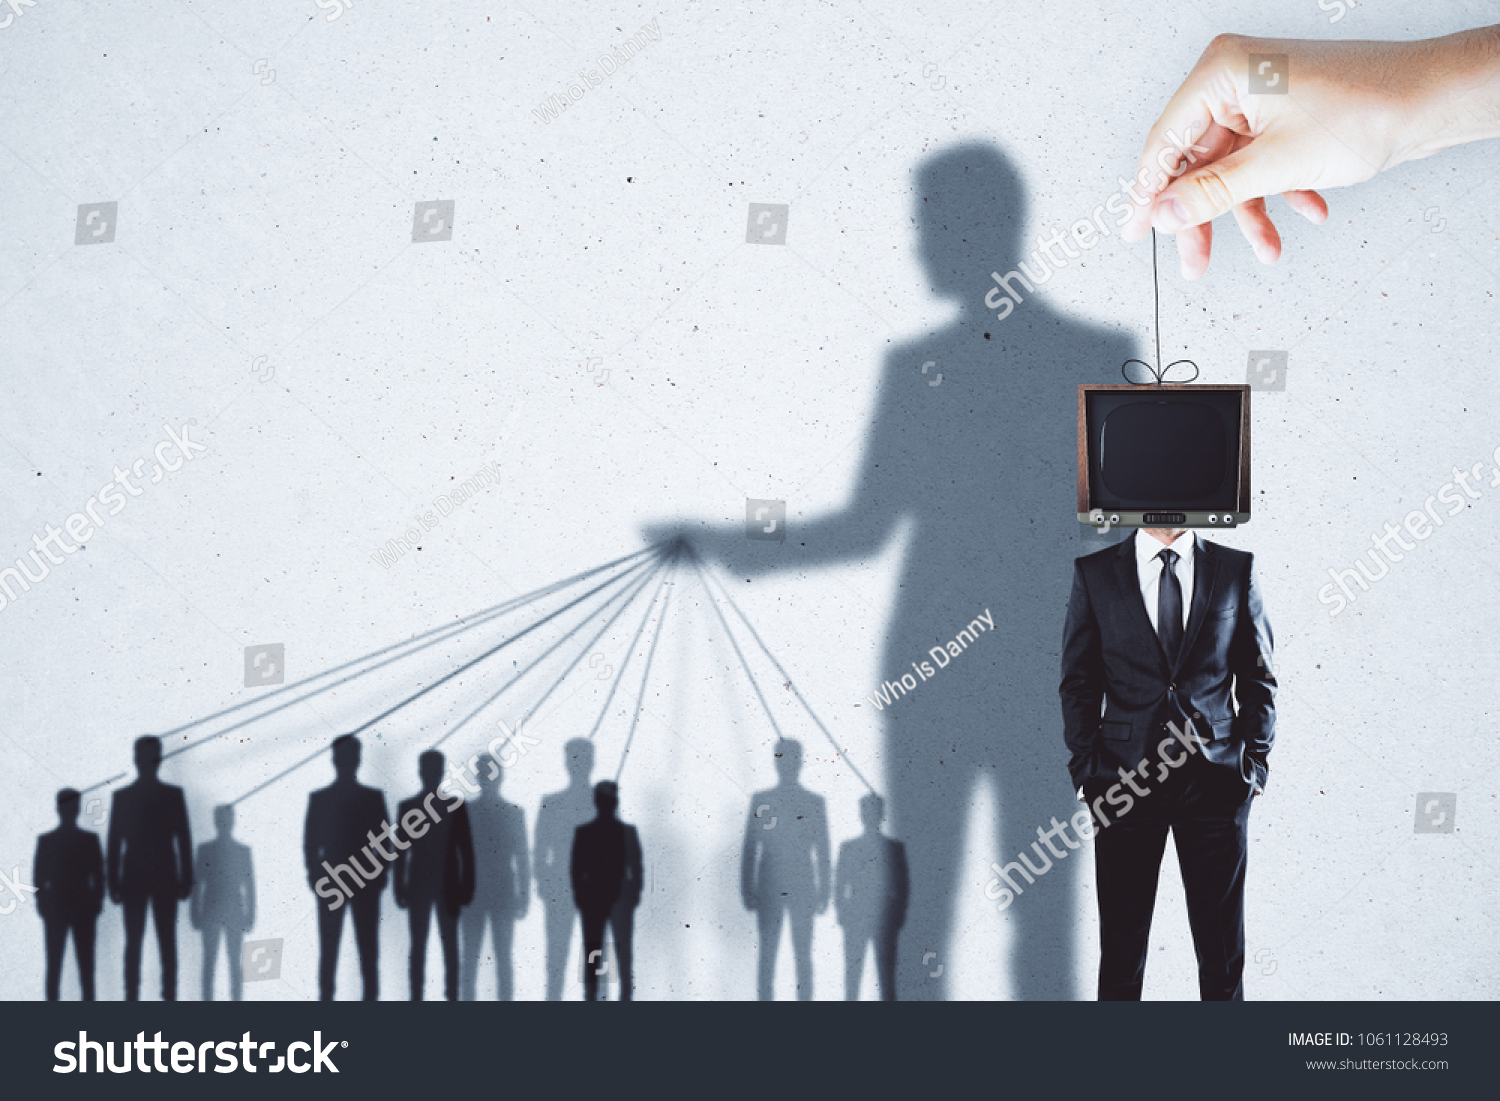 Creative TV manipulation and brainwash background with people and shadows #1061128493